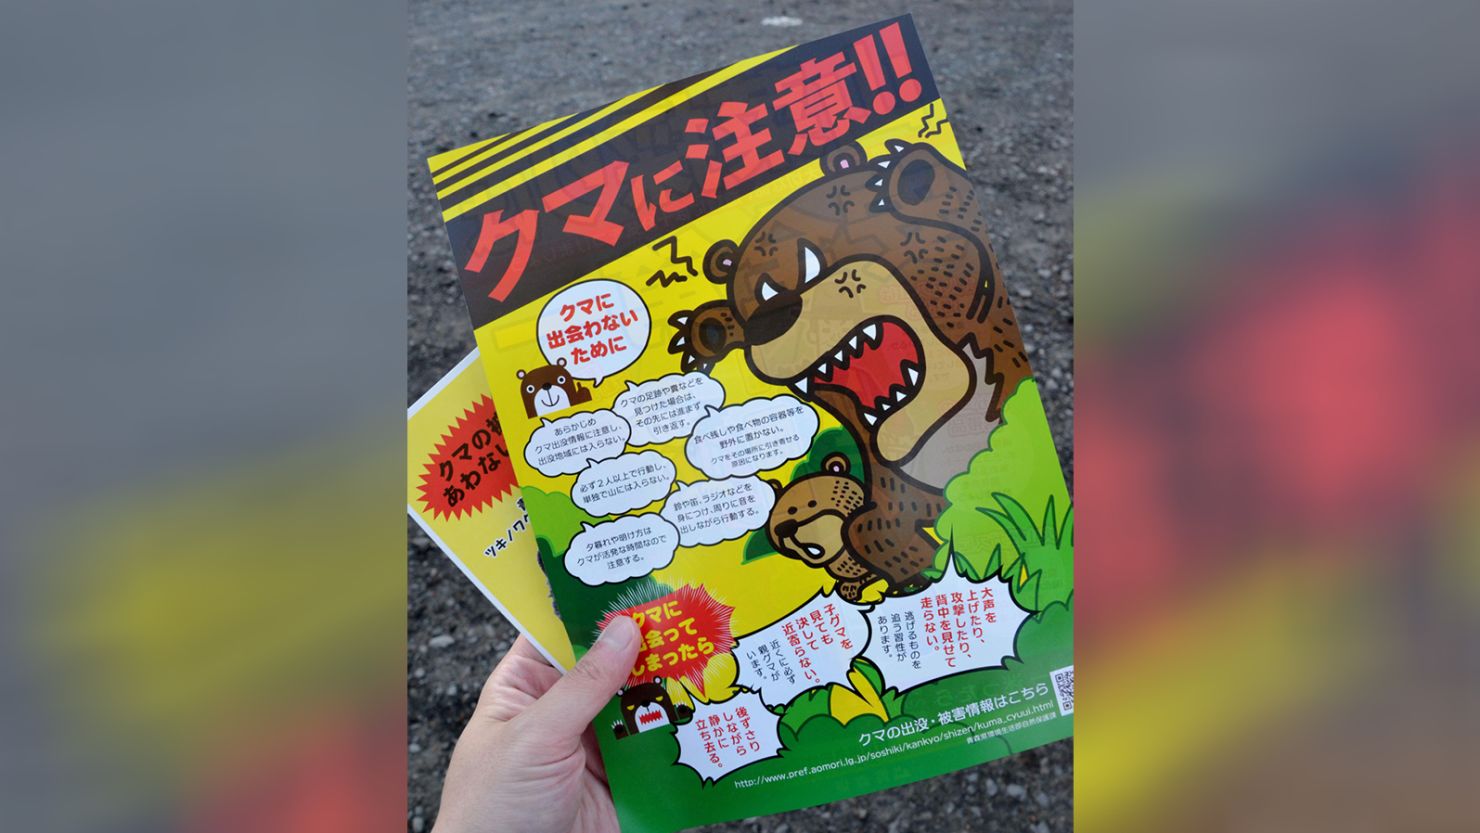 Flyers to warn of bear attacks are distributed in Aomori Prefecture, northeastern Japan, on May 18, 2017. Prefectural police in Aomori and Akita have told local residents not to enter forests where bears were spotted at a time of year when they forage for bamboo shoots and mountain vegetables.